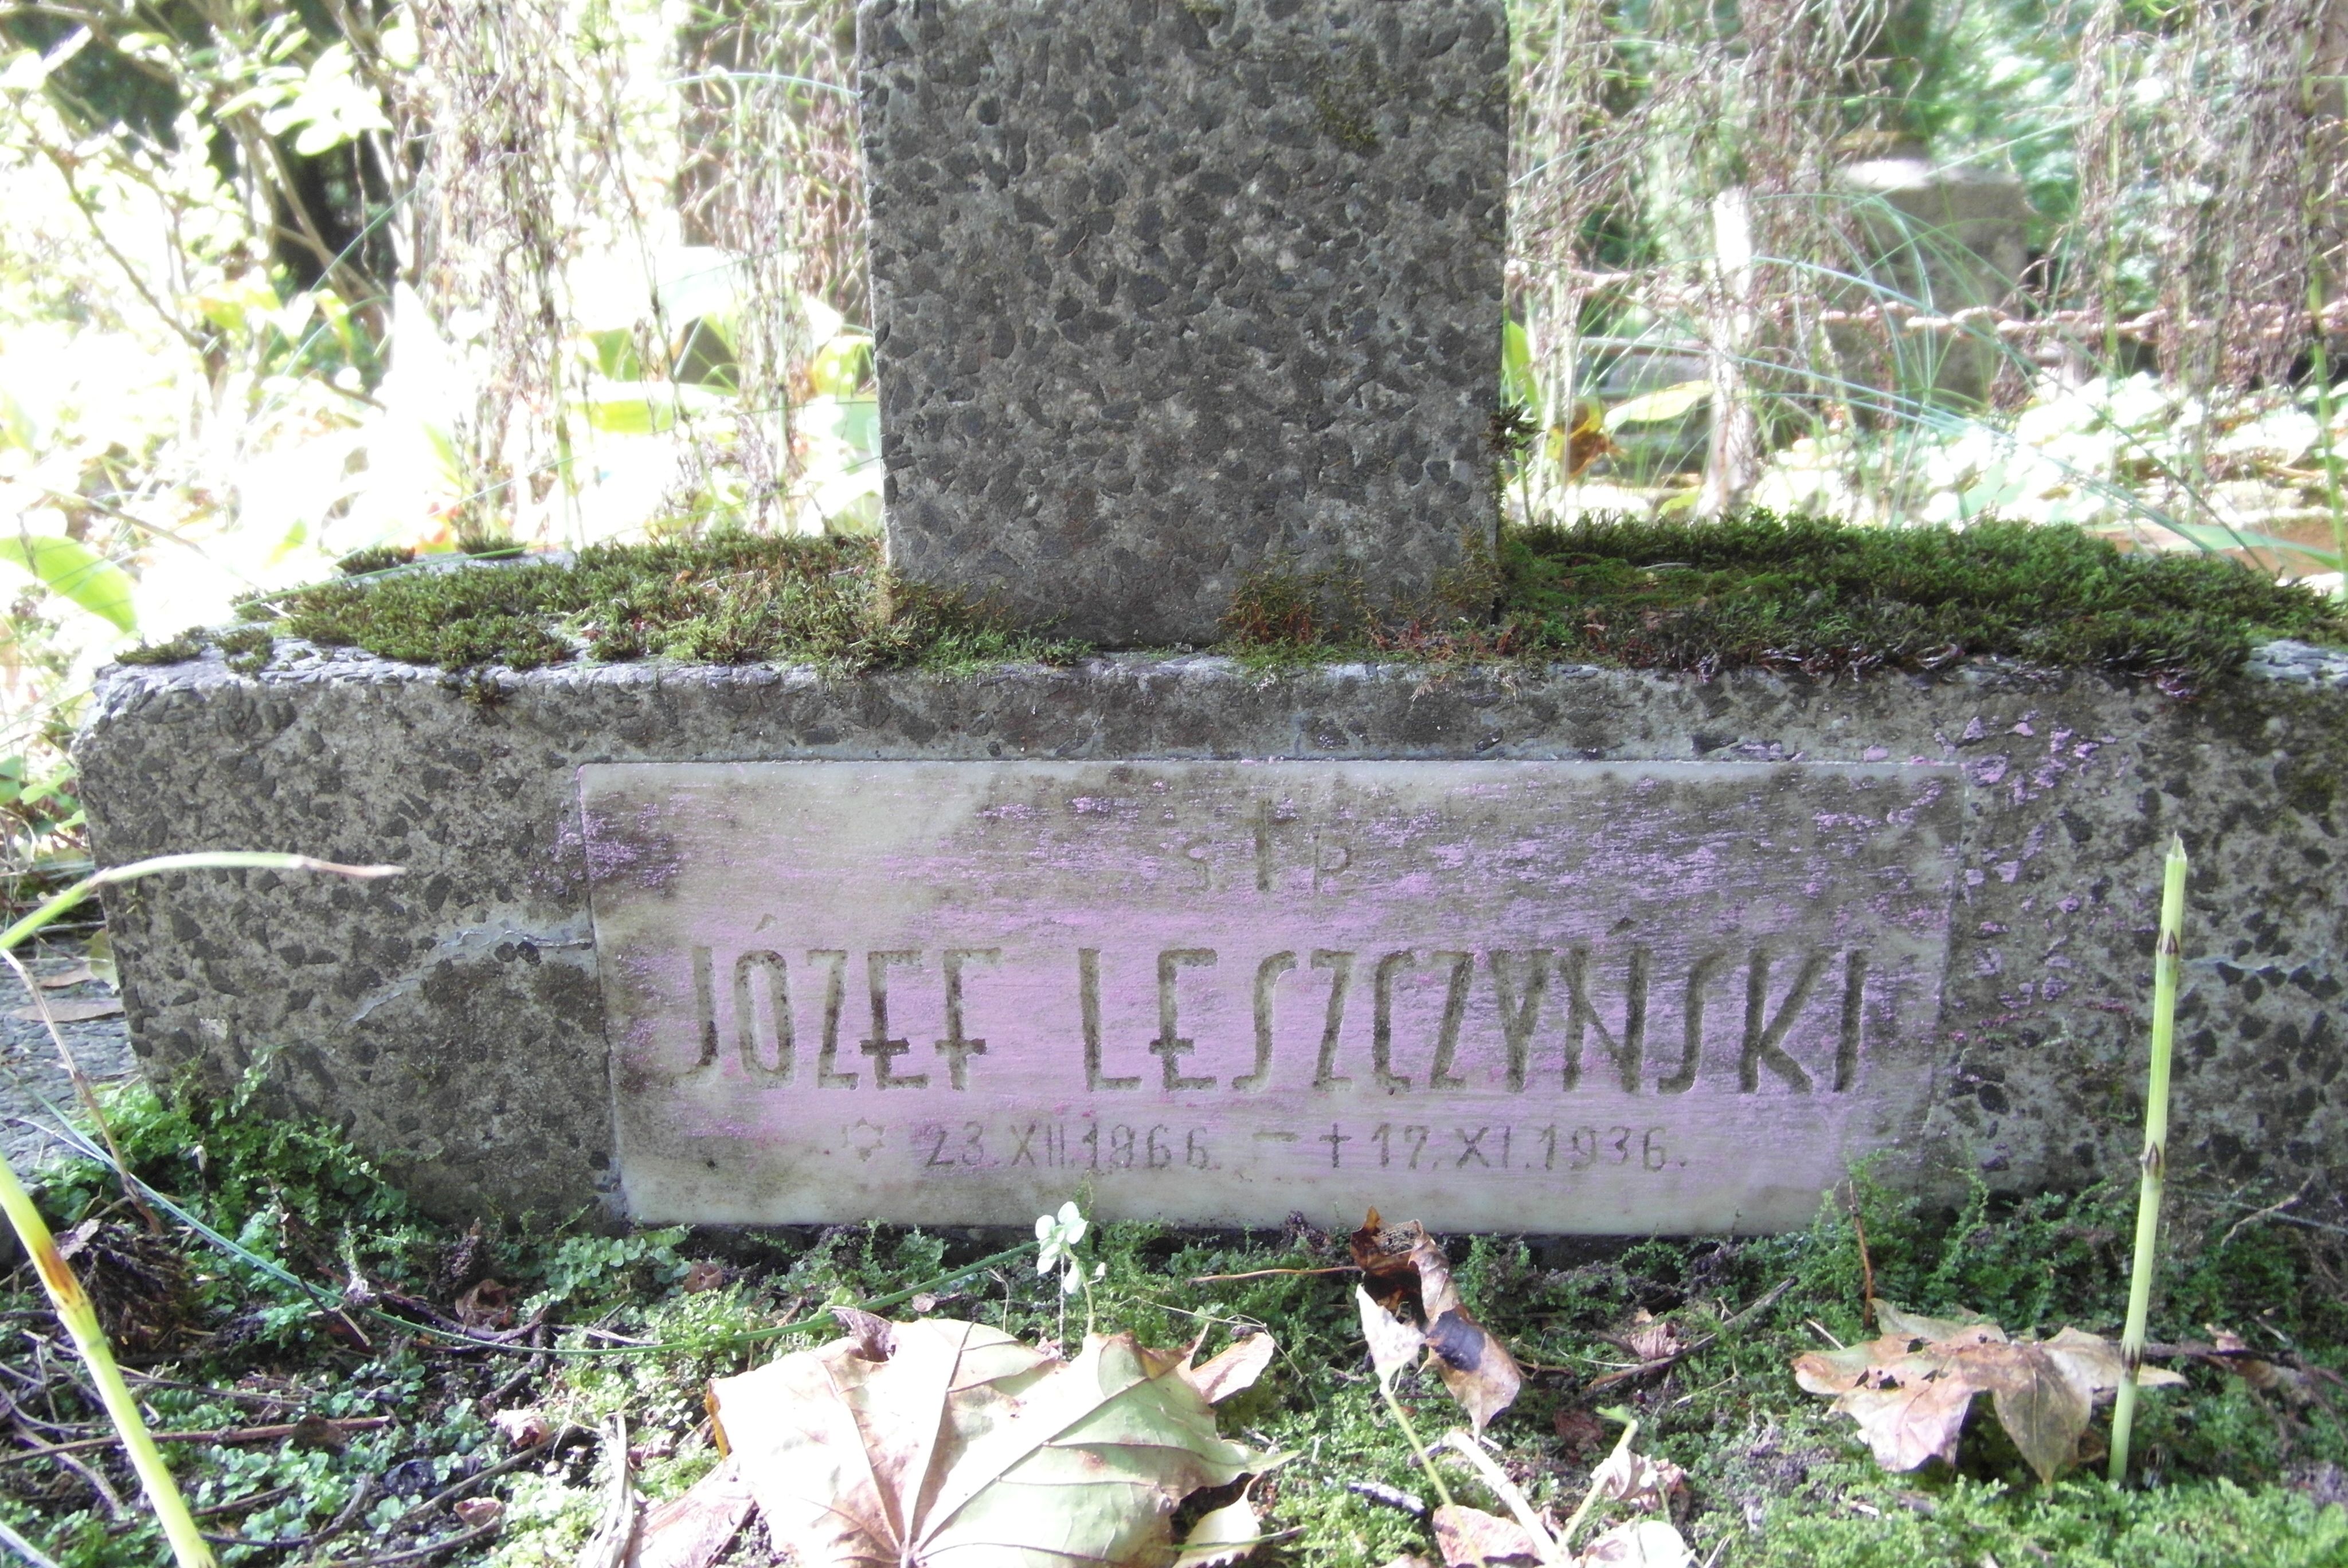 Inscription from the tombstone of Jozef Leszczynski, St Michael's Cemetery in Riga, as of 2021.